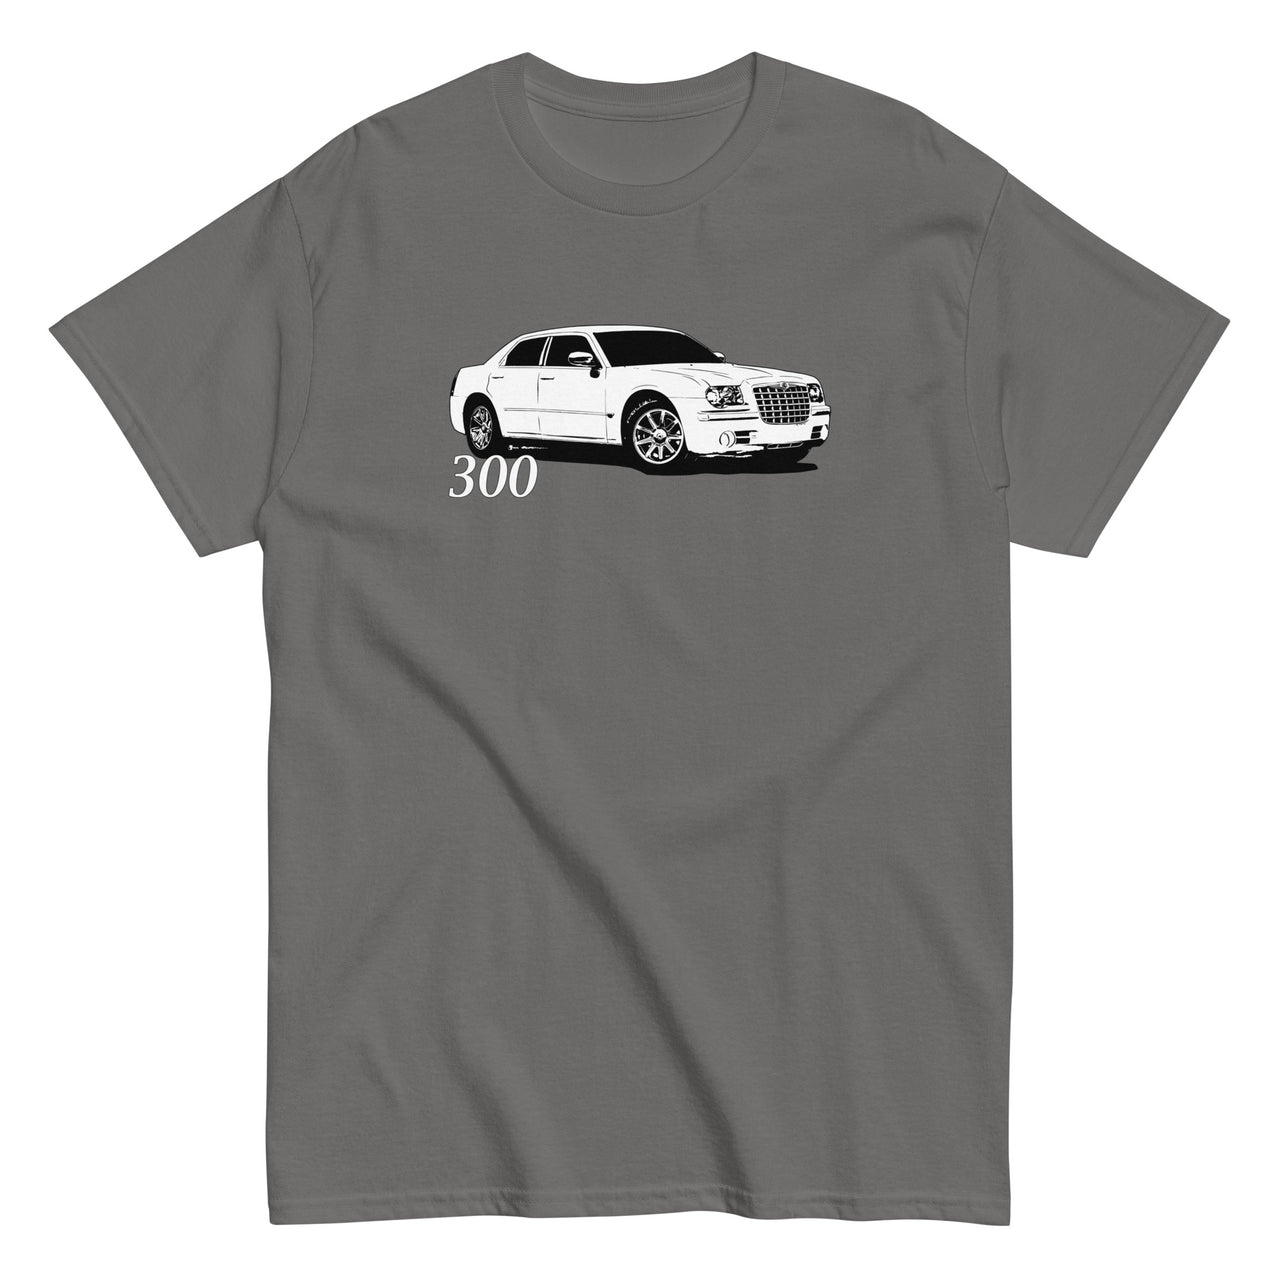 Early chrysler 300 T-Shirt in grey